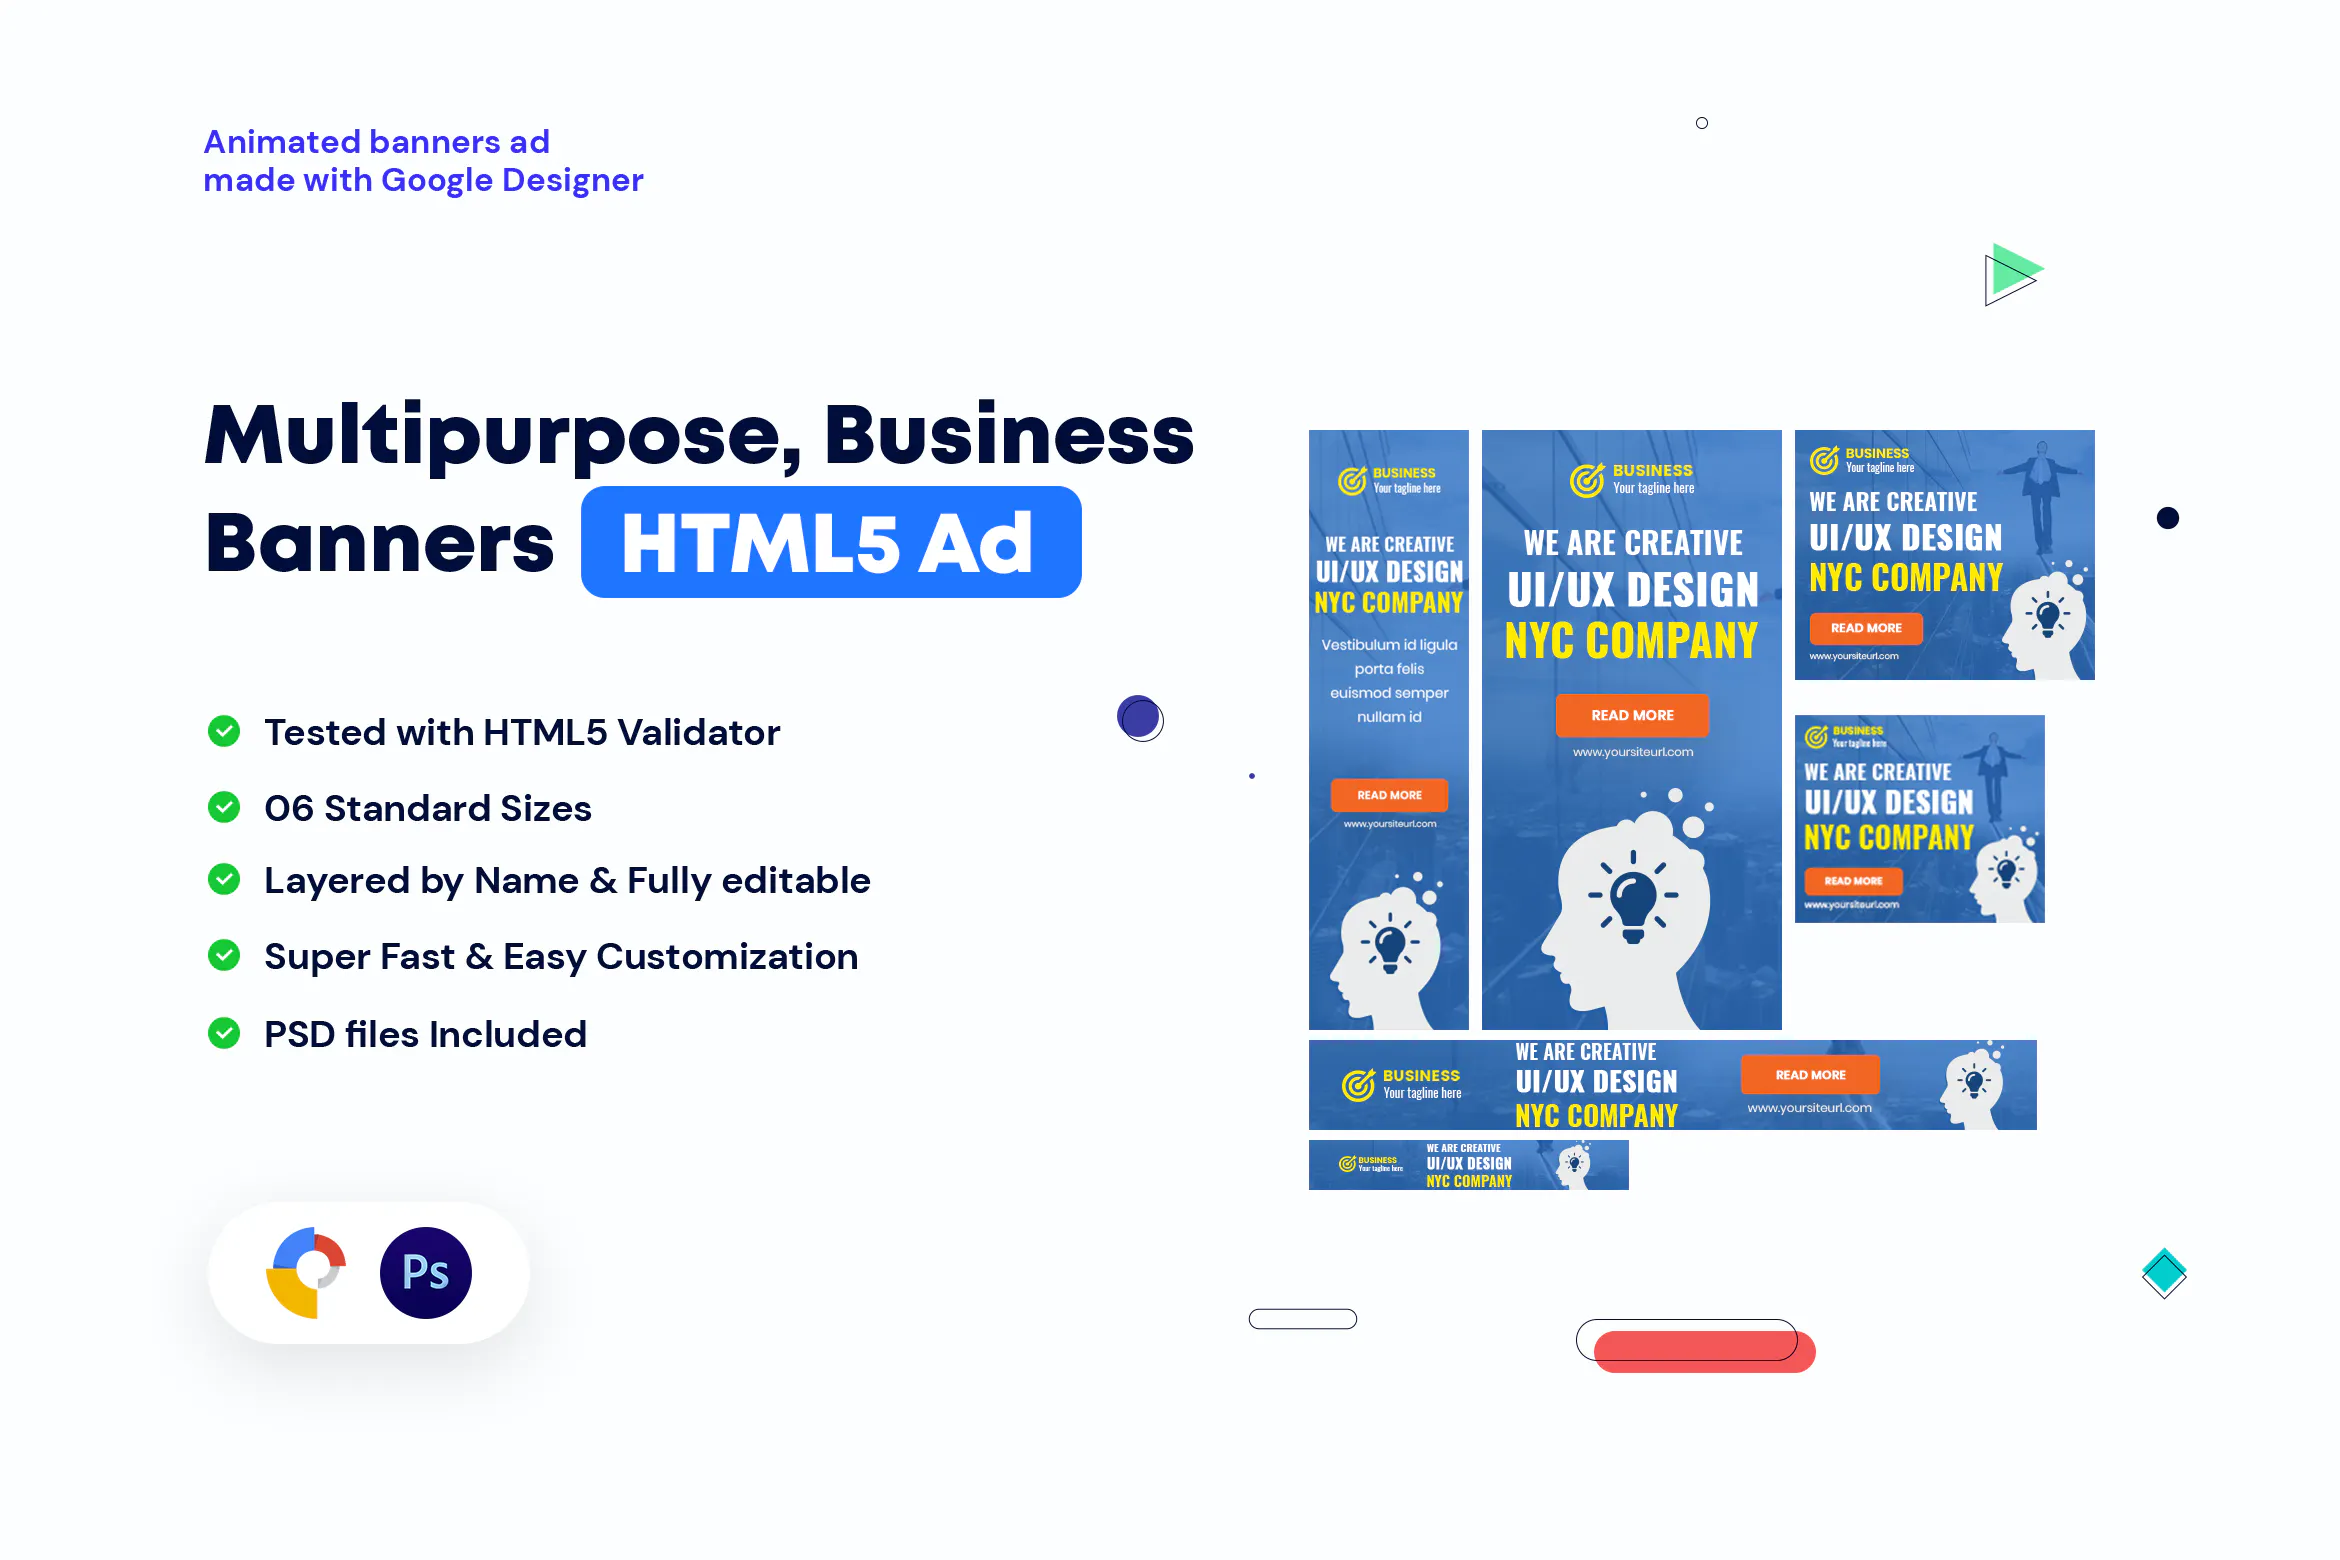 Multipurpose, Business Banners HTML5 Ad